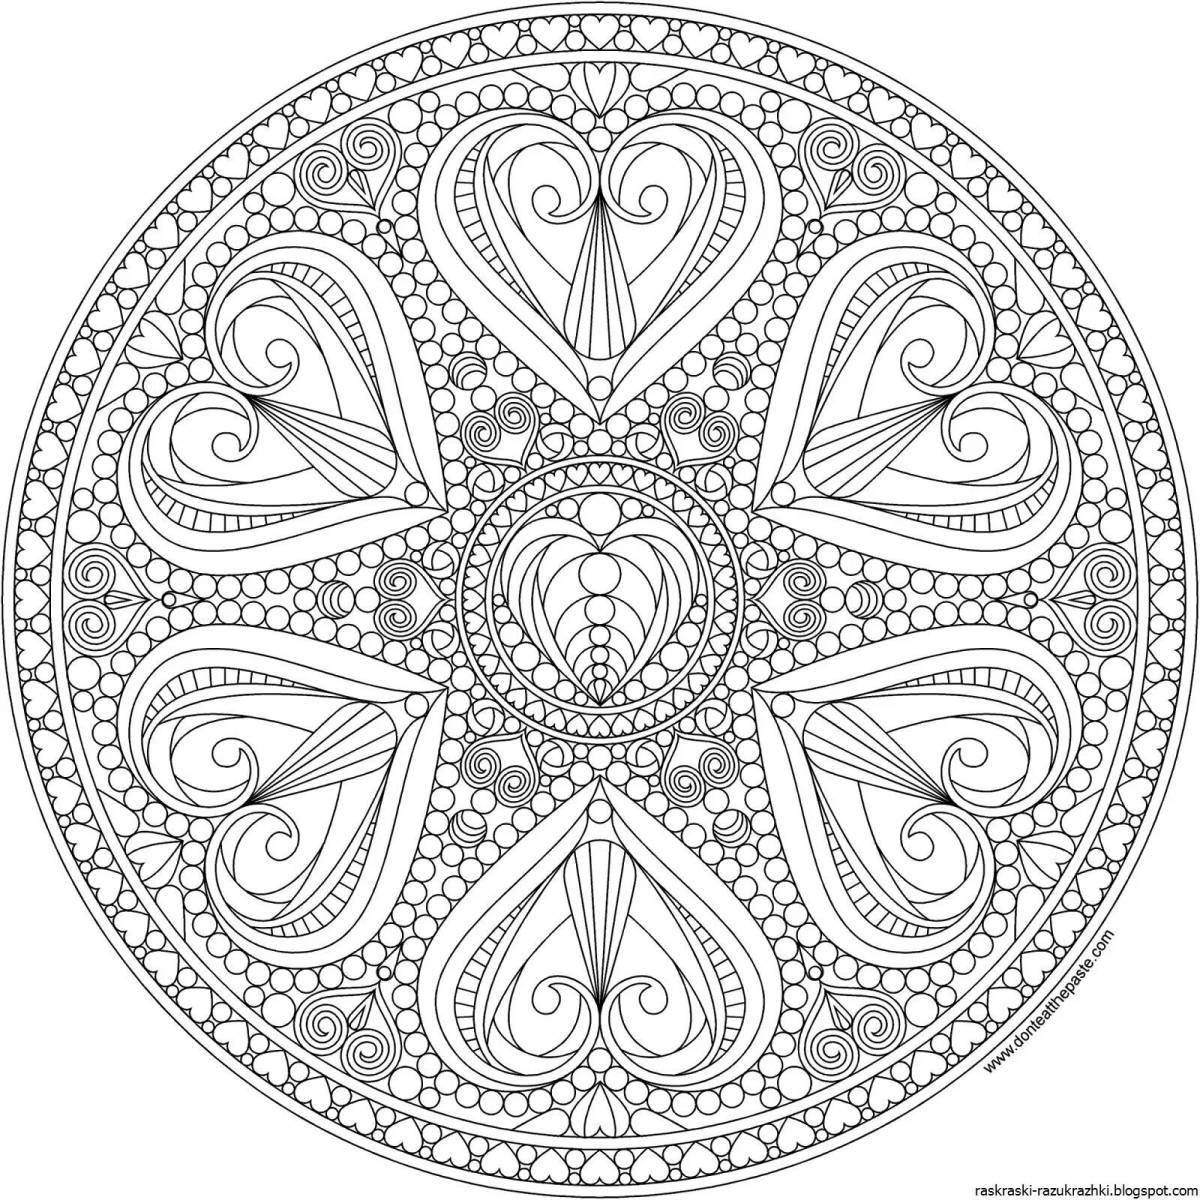 Radiant coloring page взрослая мандала